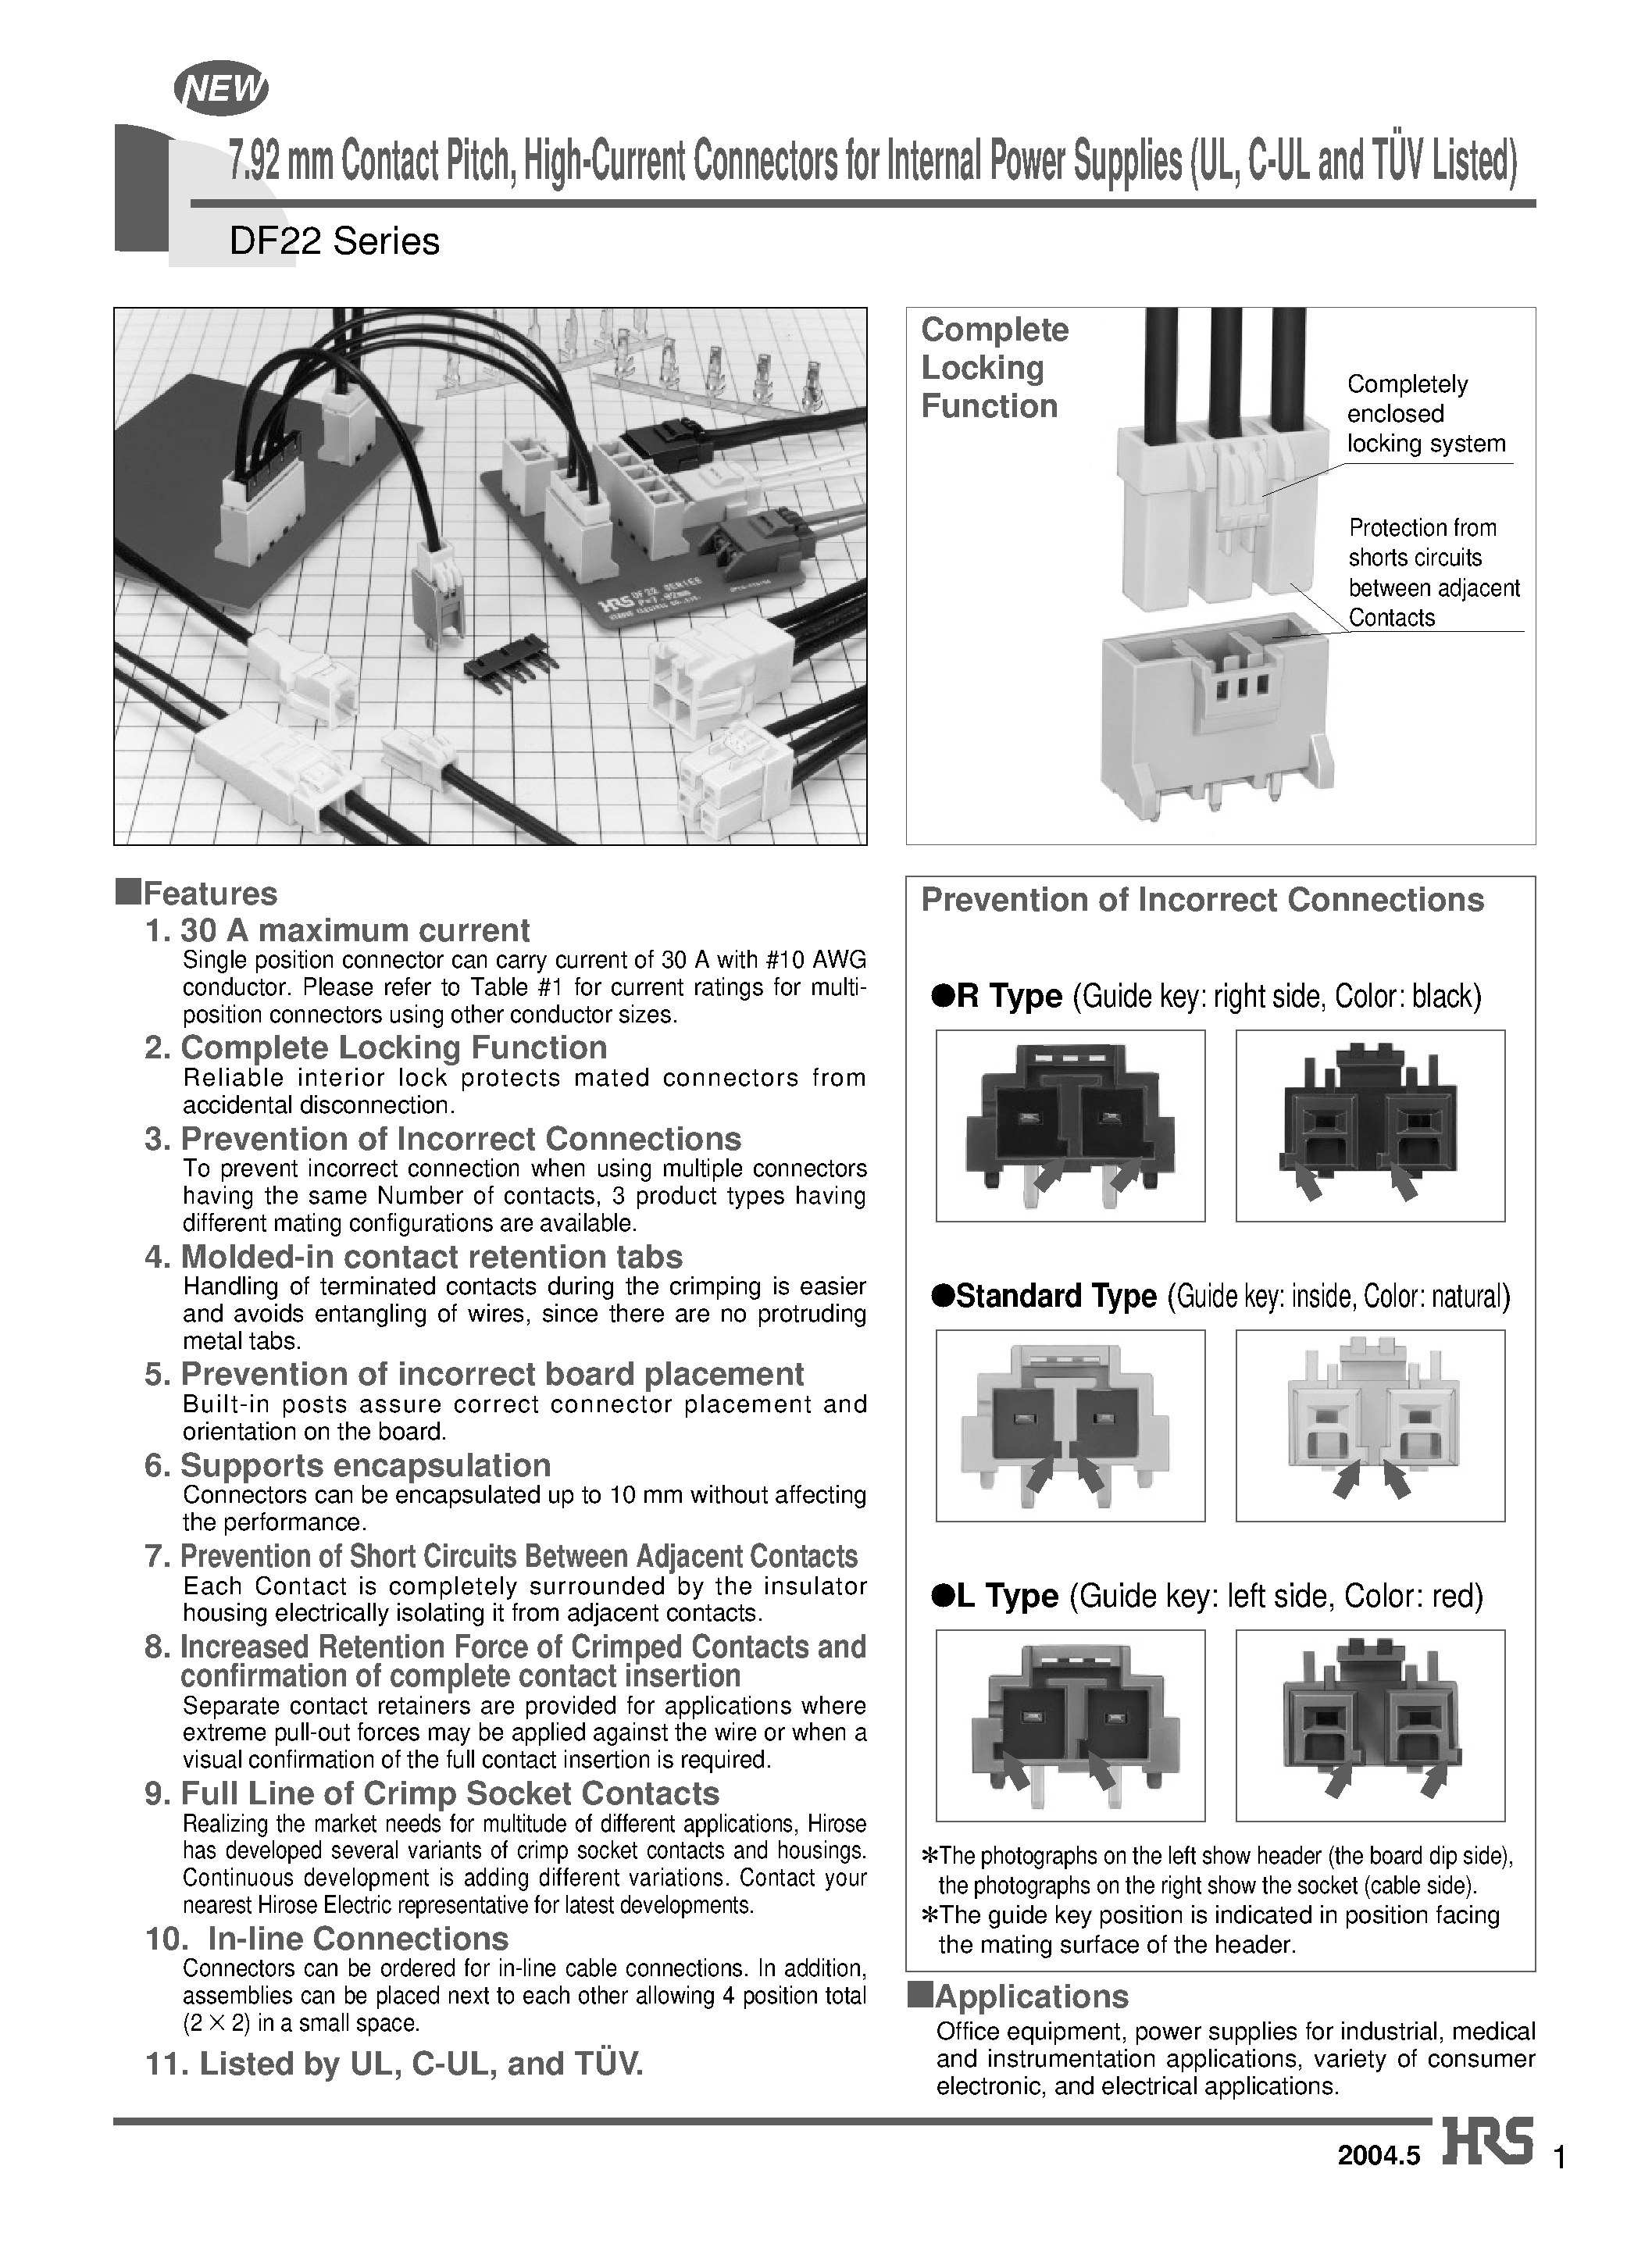 Даташит DF22AL-2EP-7.92C - 7.92 mm Contact Pitch/ High-Current Connectors for Internal Power Supplies (UL/ C-UL and TUV Listed) страница 1